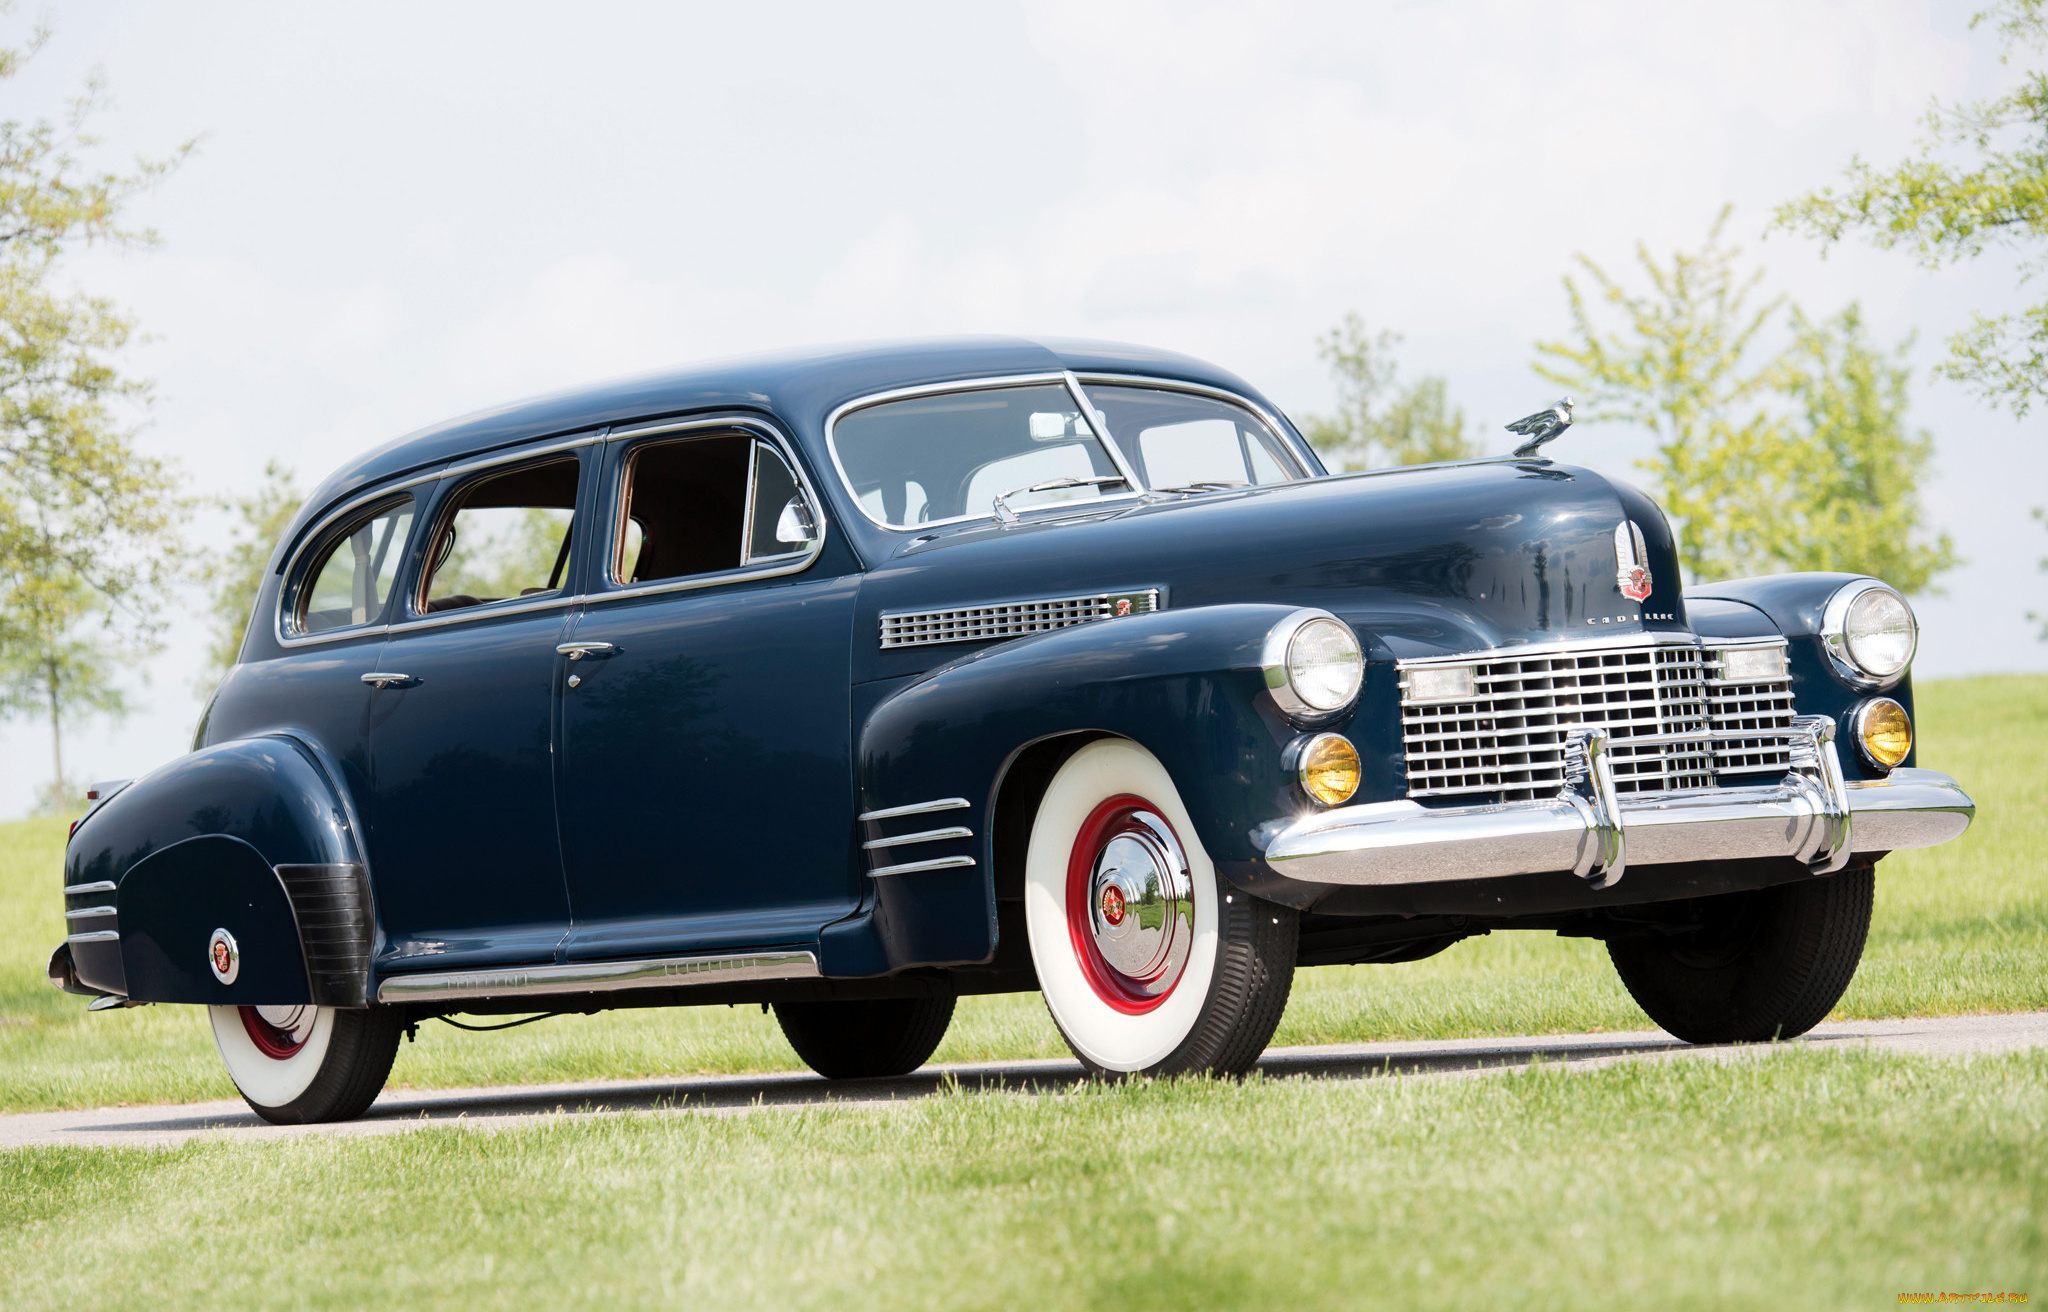 cadillac, series, 67, touring, sedan, by, fisher, 1941, автомобили, cadillac, series, 67, touring, sedan, fisher, 1941